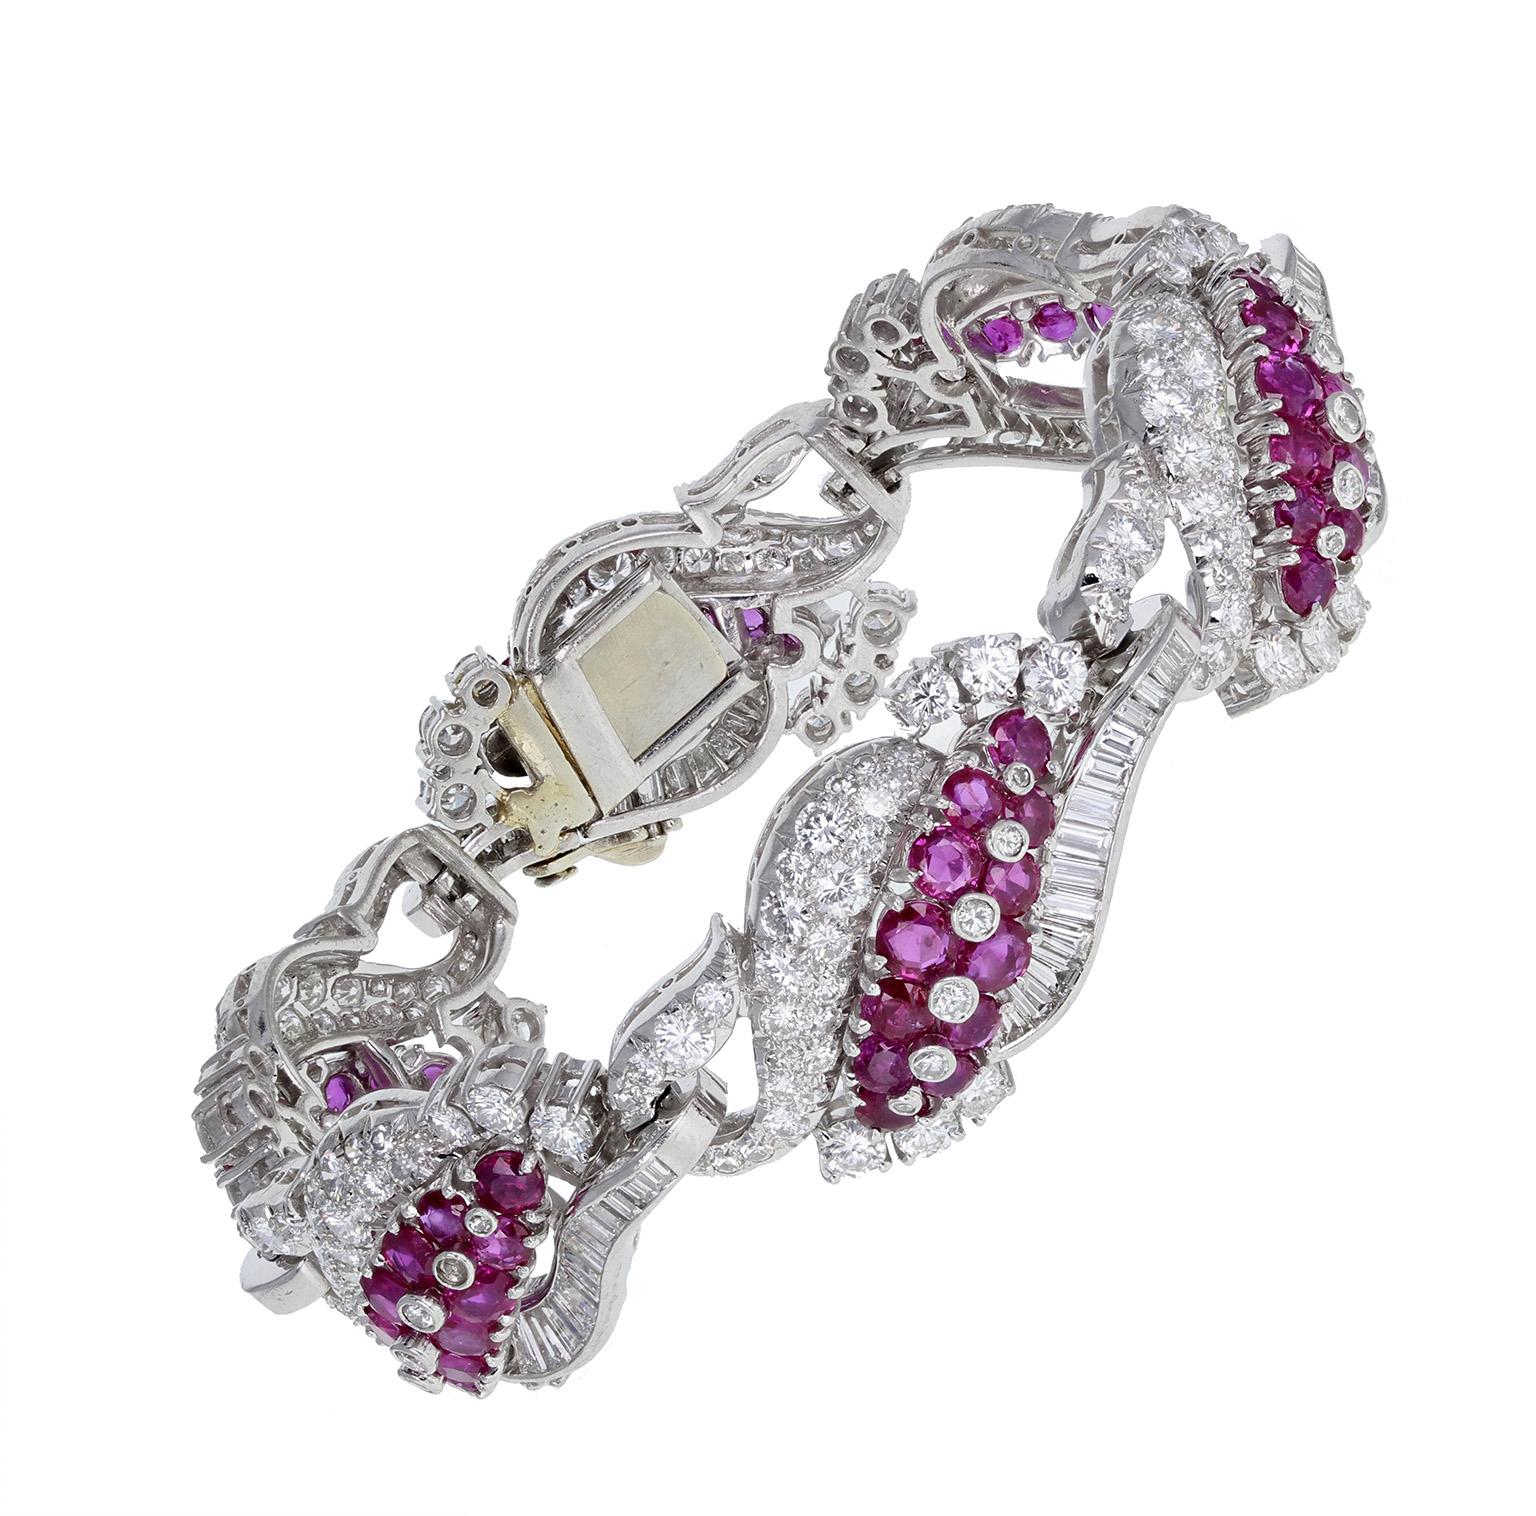  An exquisite 1930s diamond and Burma ruby bracelet in platinum. Comprising curved, pierced sections, mounted with claw-set, brilliant-cut blood-red Burma rubies and brilliant and baguette-cut diamonds. 18-carat white gold clasp. A particularly fine